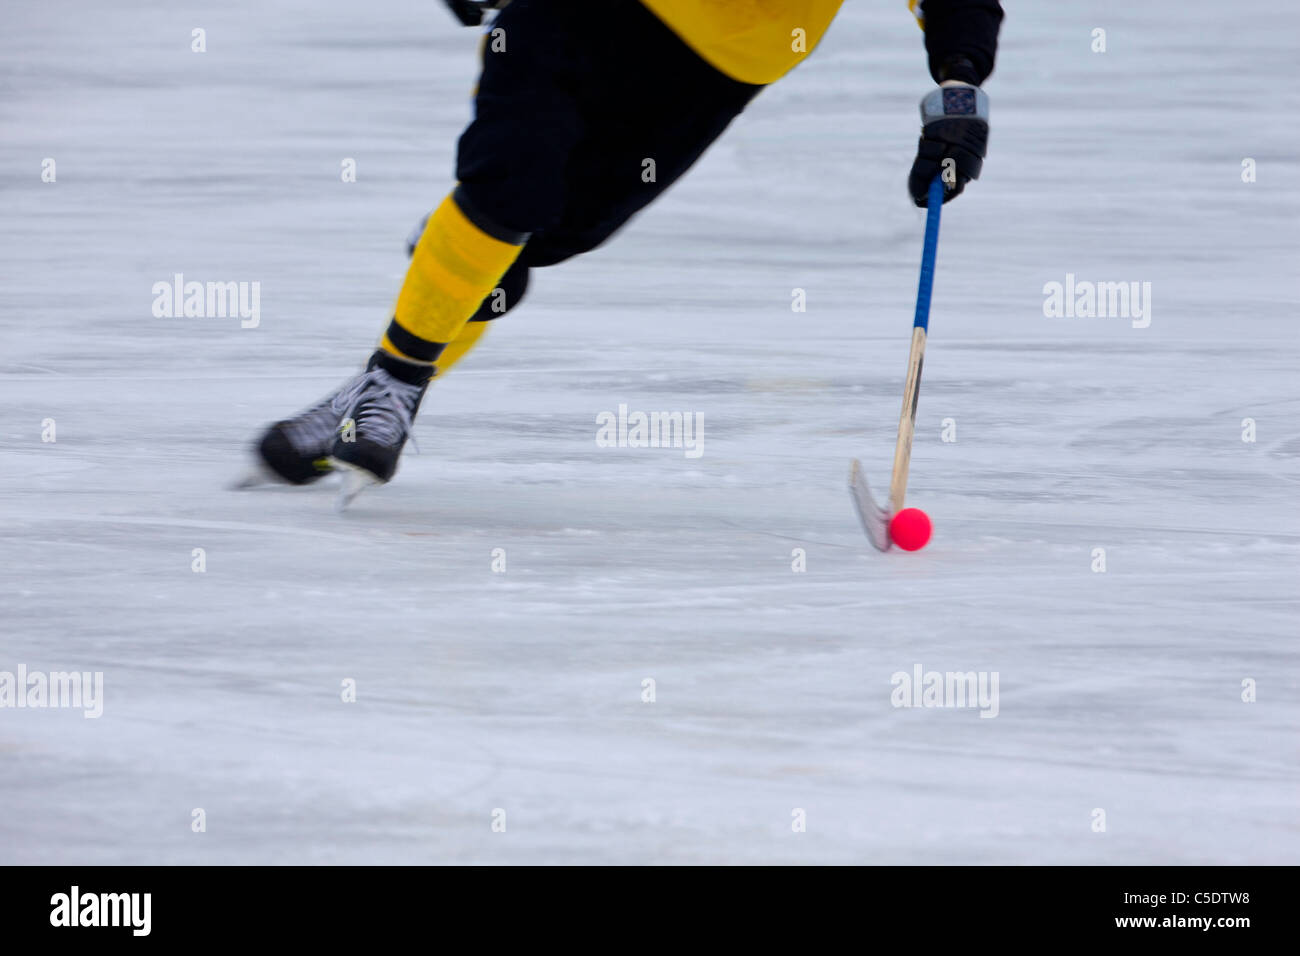 Low section of bandy on in blurred motion Stock Photo